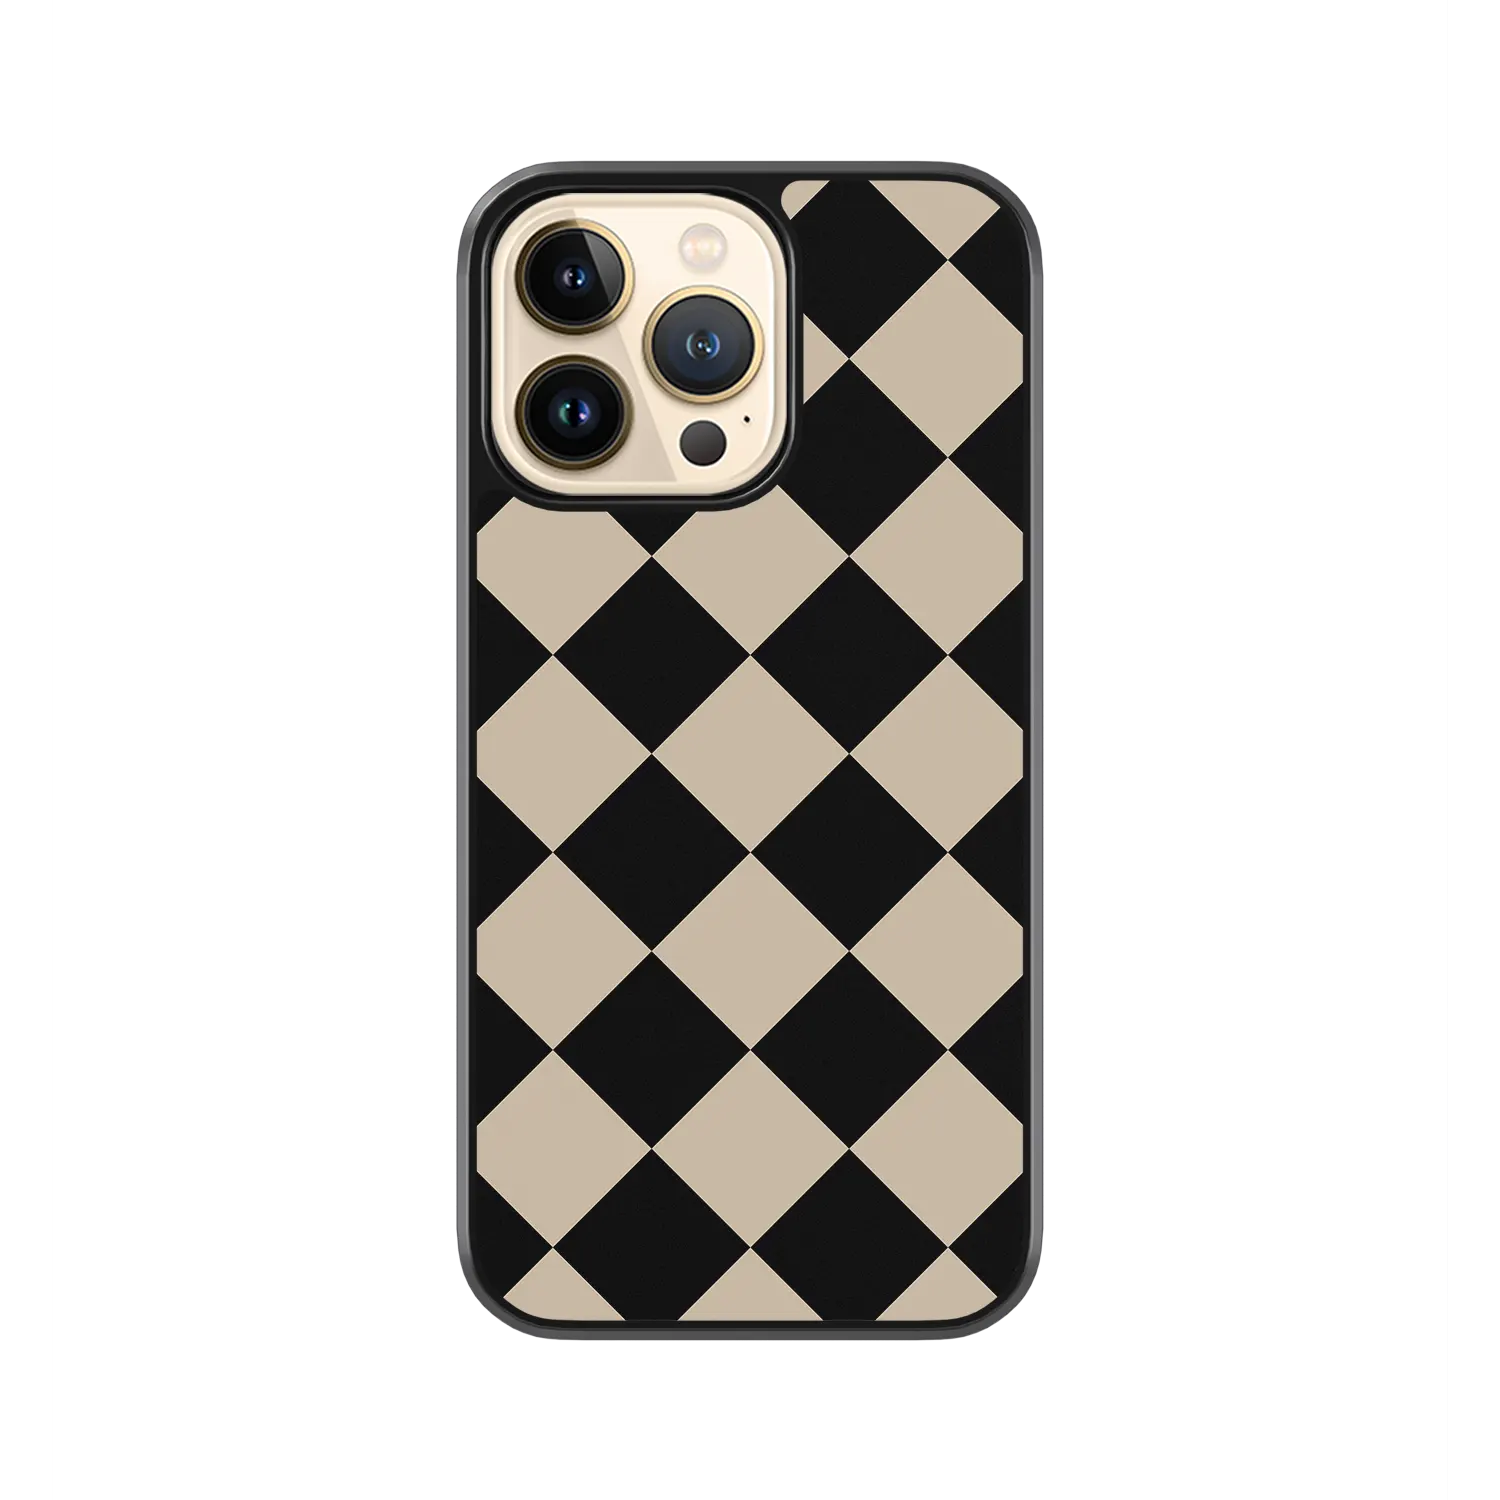 Chess iphone 11 pro case